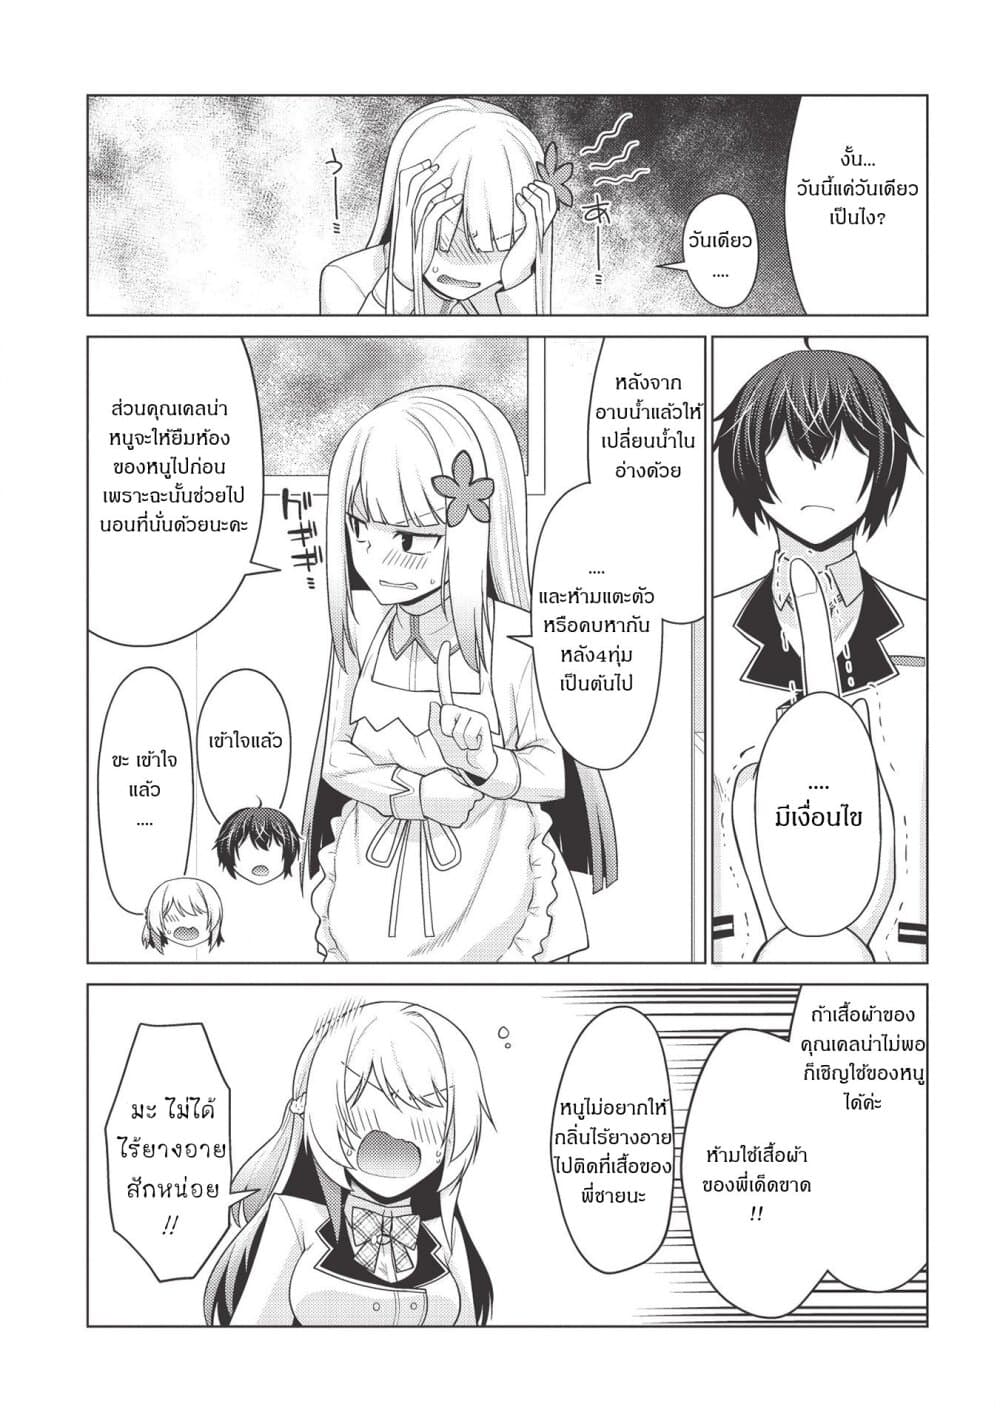 Tales of Taking Throne Who the Weakest and Incompetent Student 6-วันๆกับยัยแวมไพร์ (3)